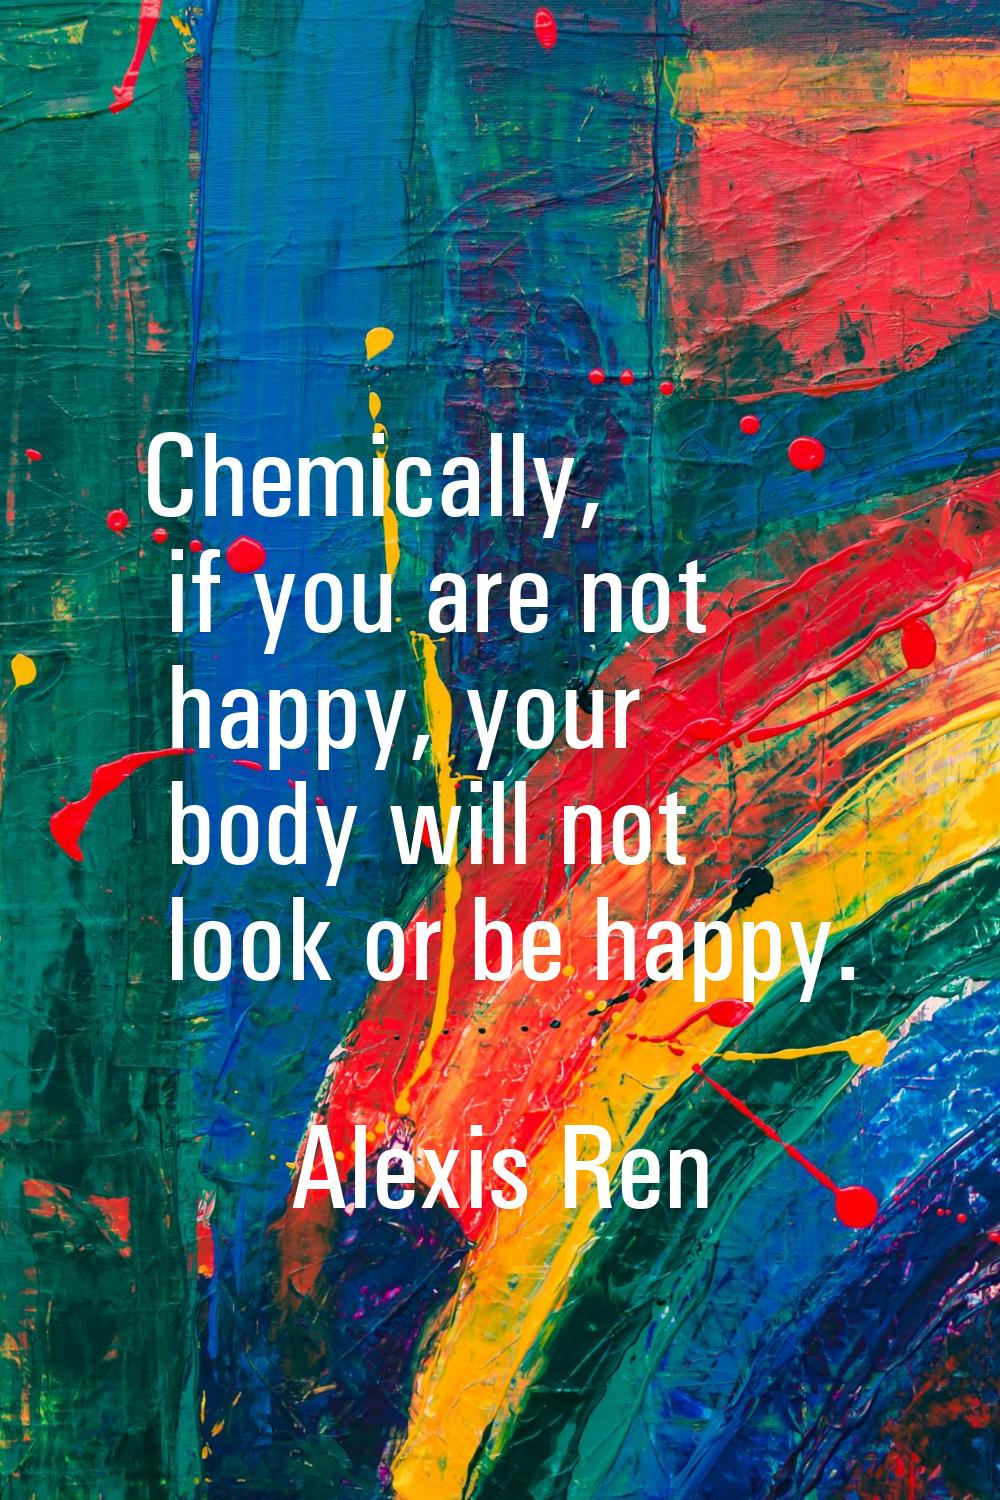 Chemically, if you are not happy, your body will not look or be happy.